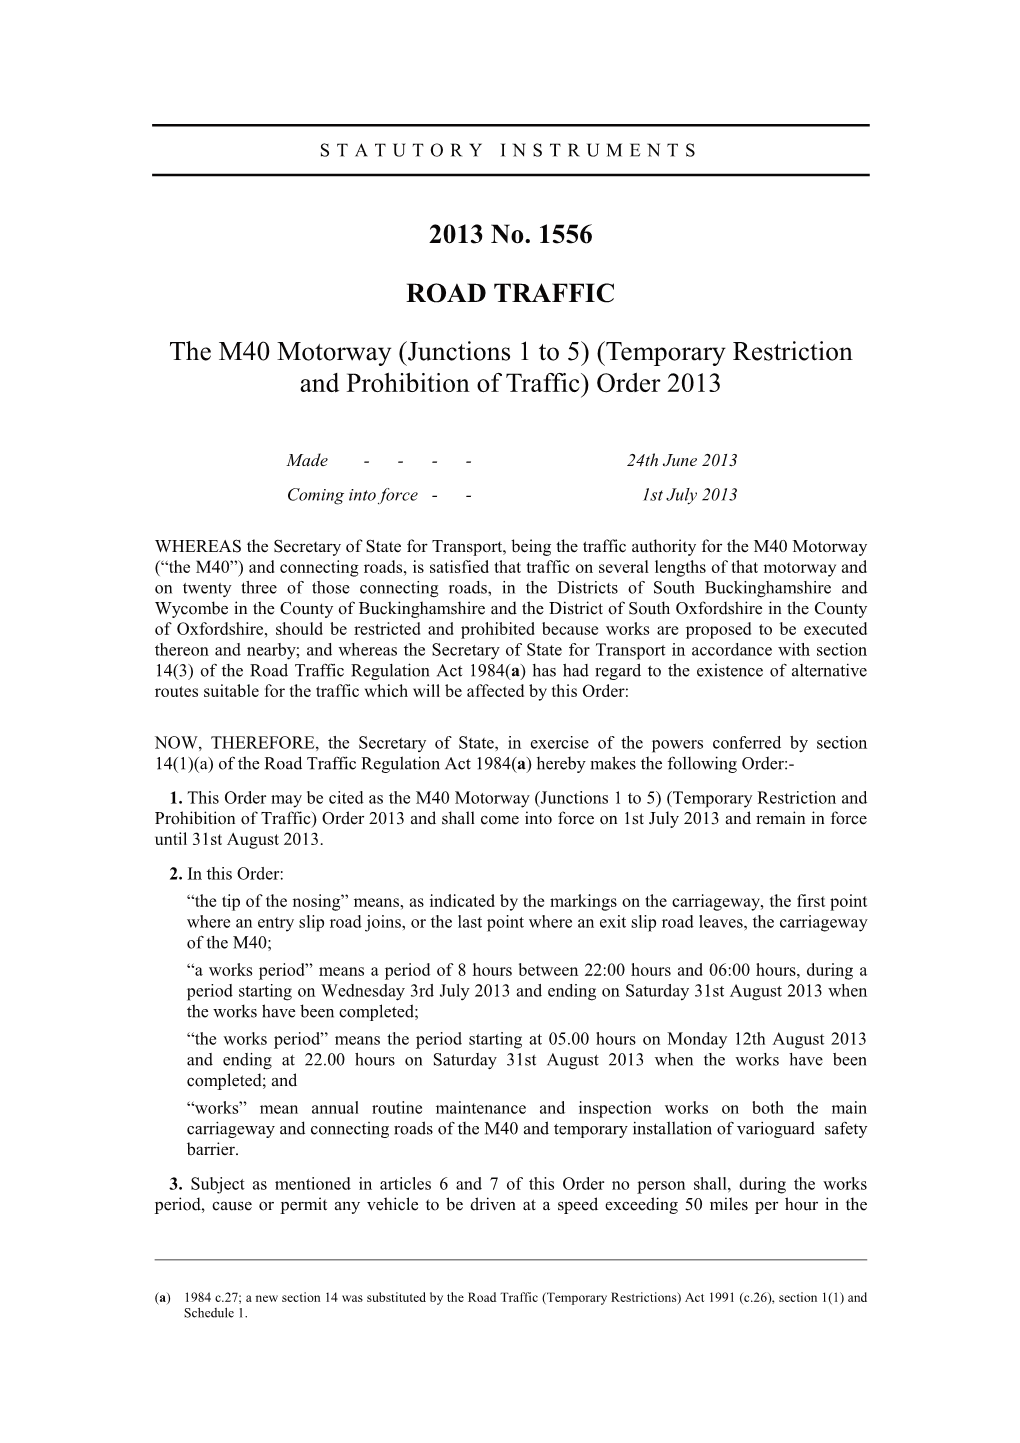 2013 No. 1556 ROAD TRAFFIC the M40 Motorway (Junctions 1 to 5) (Temporary Restriction and Prohibition of Traffic) Order 2013